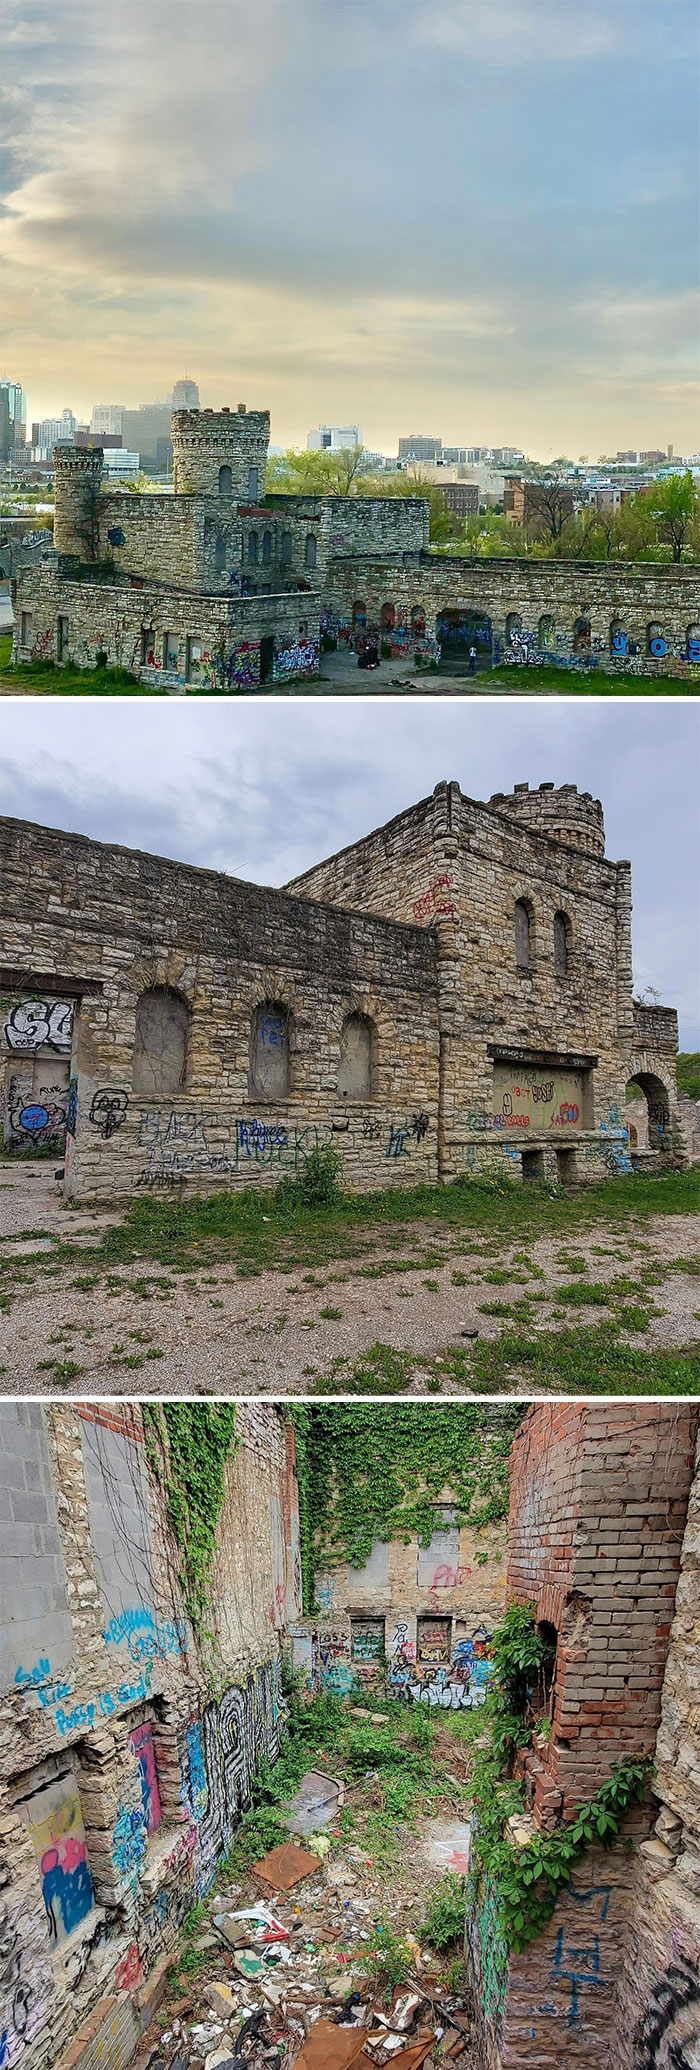 Here’s A Historic Castle In Downtown Kansas City That Sits On A Land Assemblage Of Up To 20 Acres (The Parcel For The Castle Itself Is 3.84 Acres)